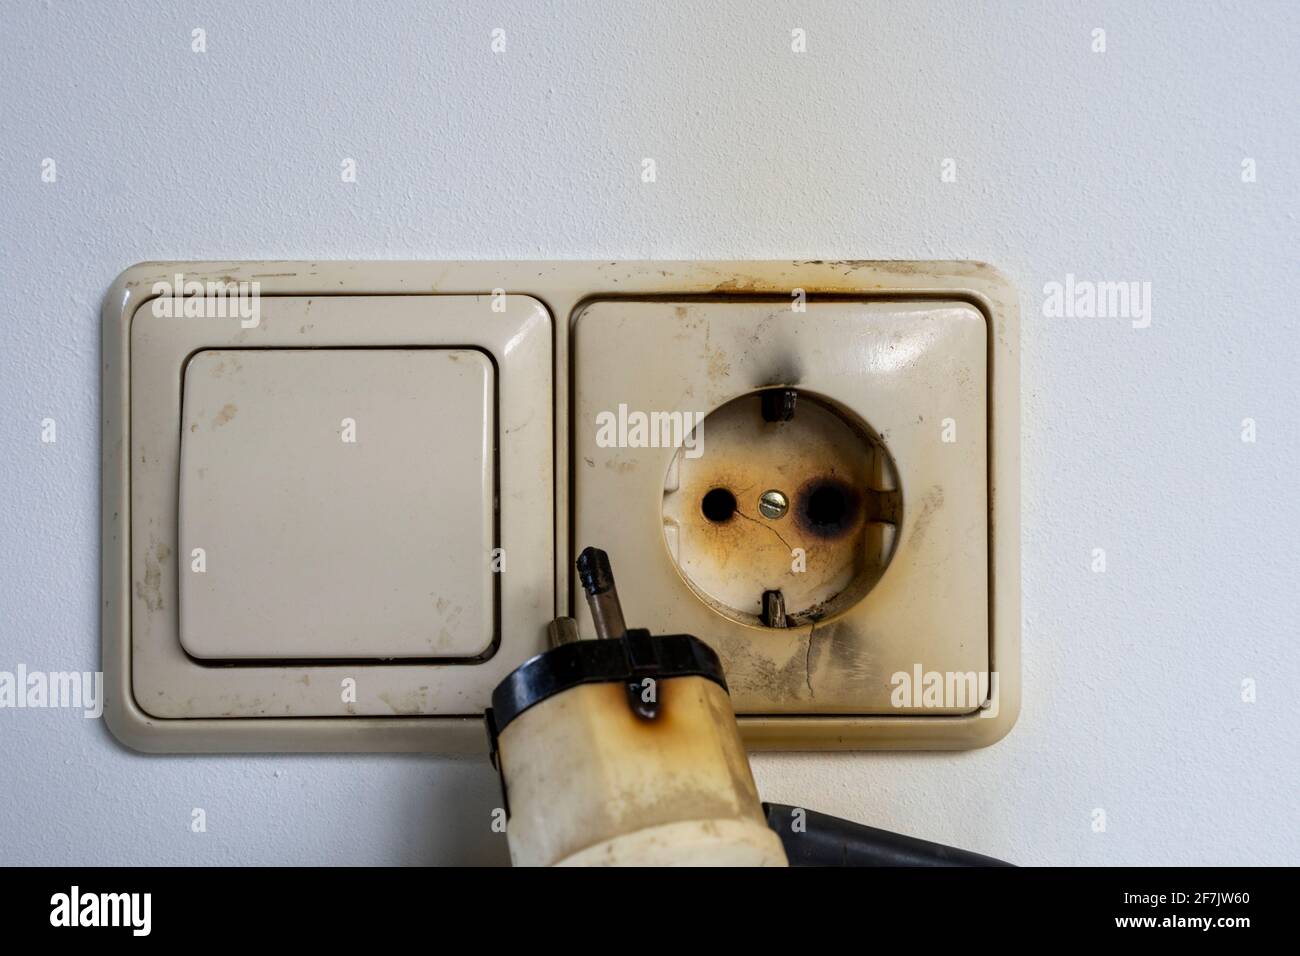 Close-up of electrical fire with the wire and wall plug Stock Photo